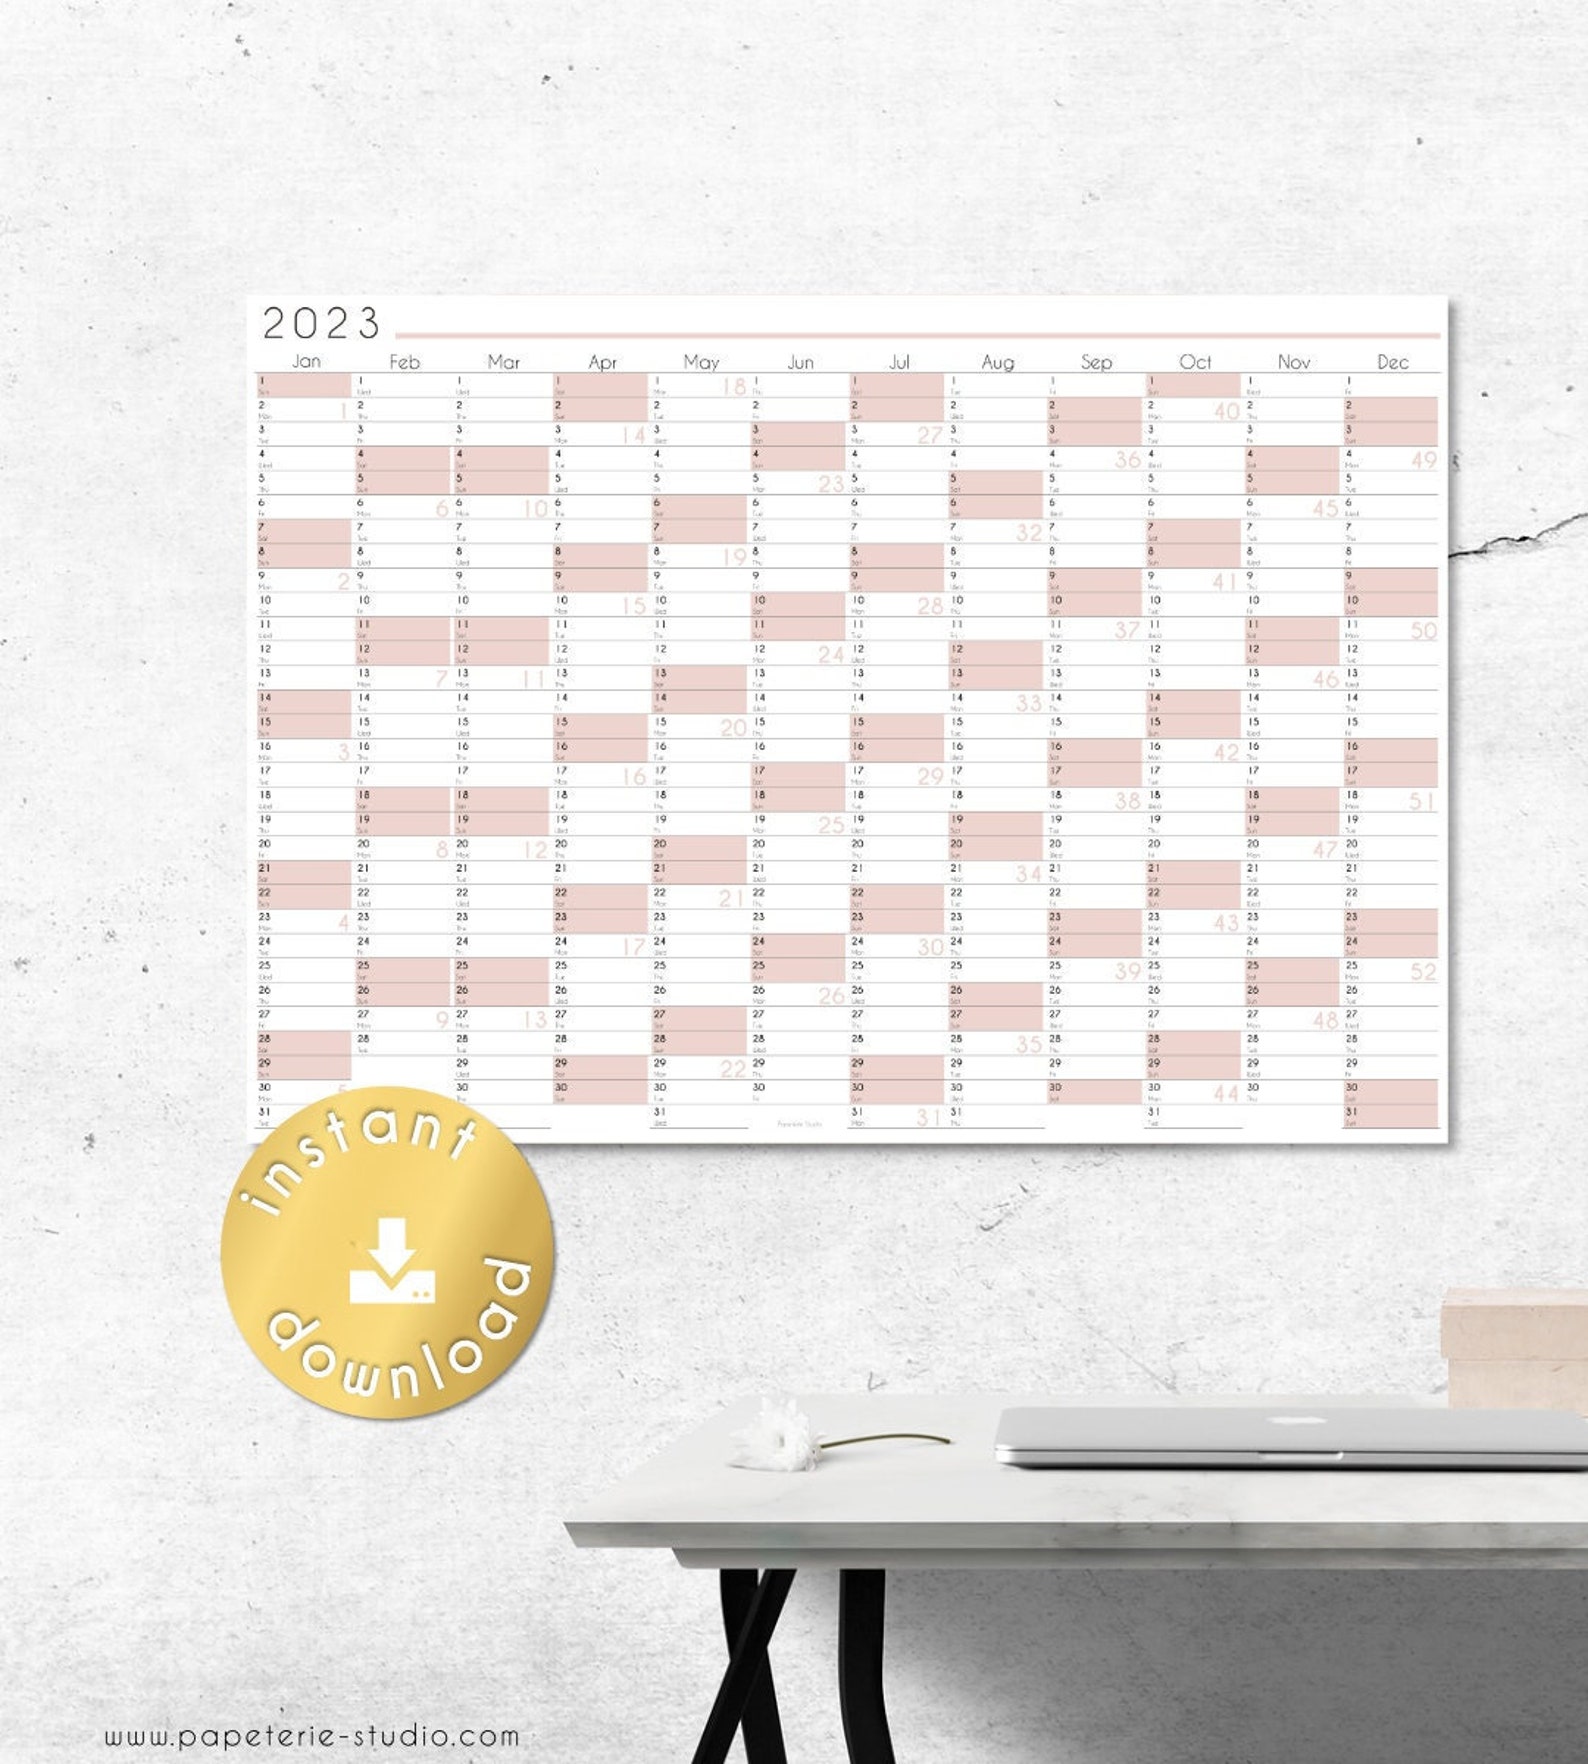 2023 YEARLY WALL CALENDAR Printable Blush Tones A1 to A4 - Etsy